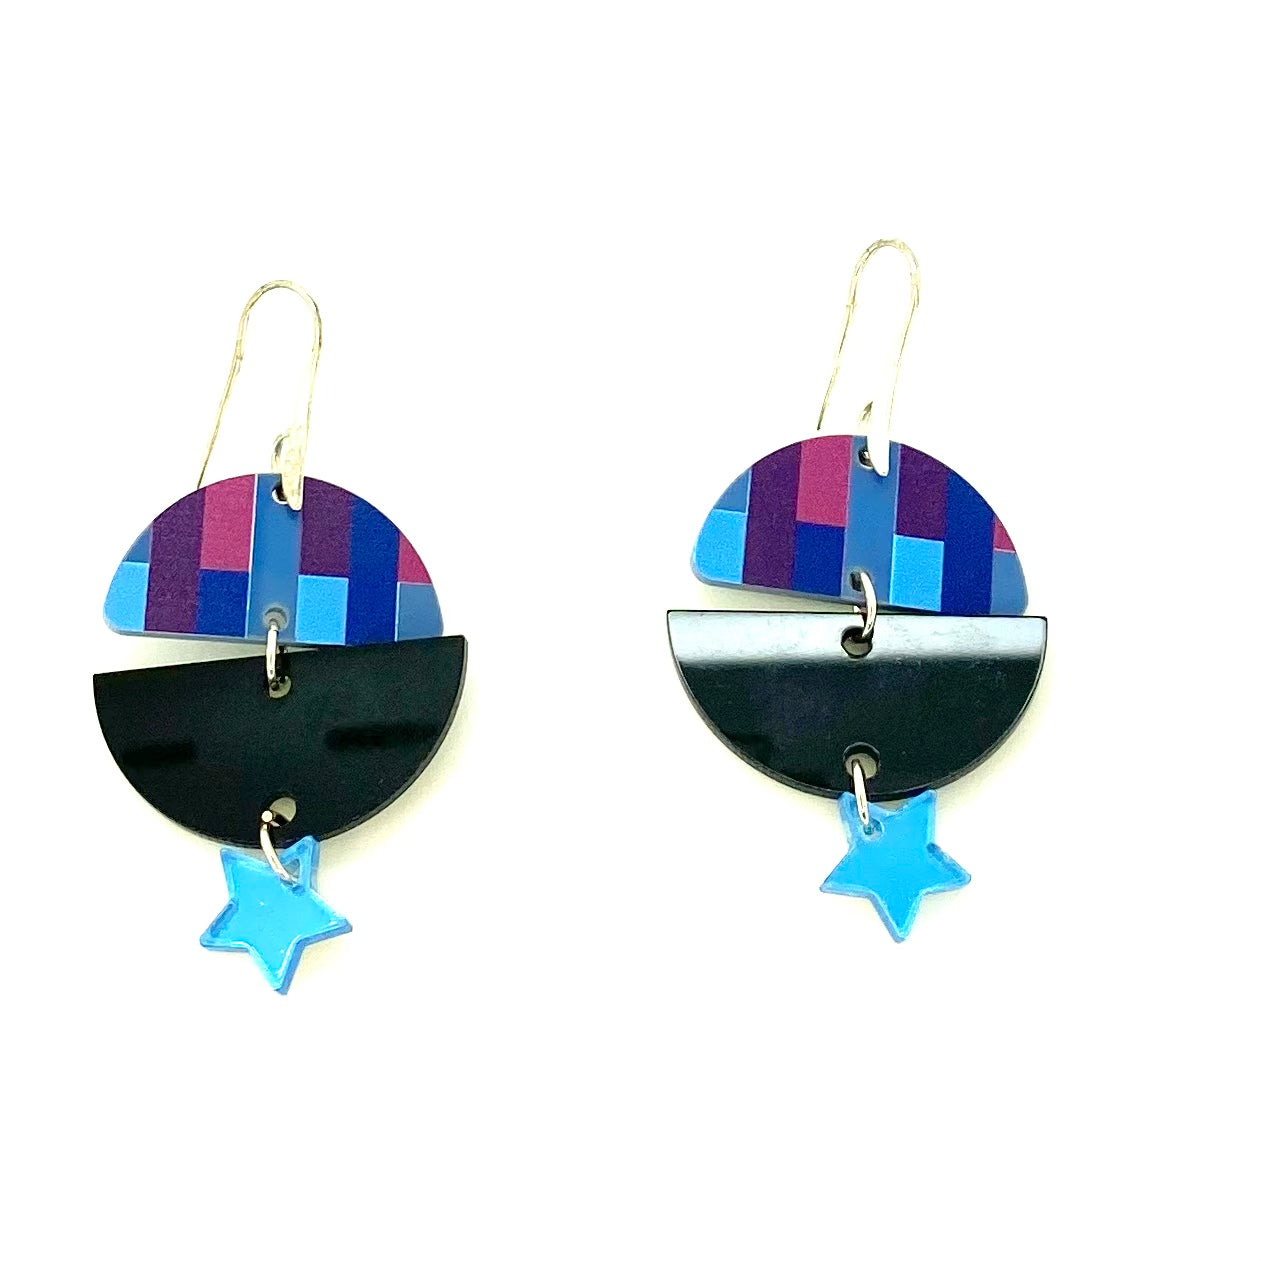 Blue stripe and black half moons matched to make circle earrings with blue star drop.